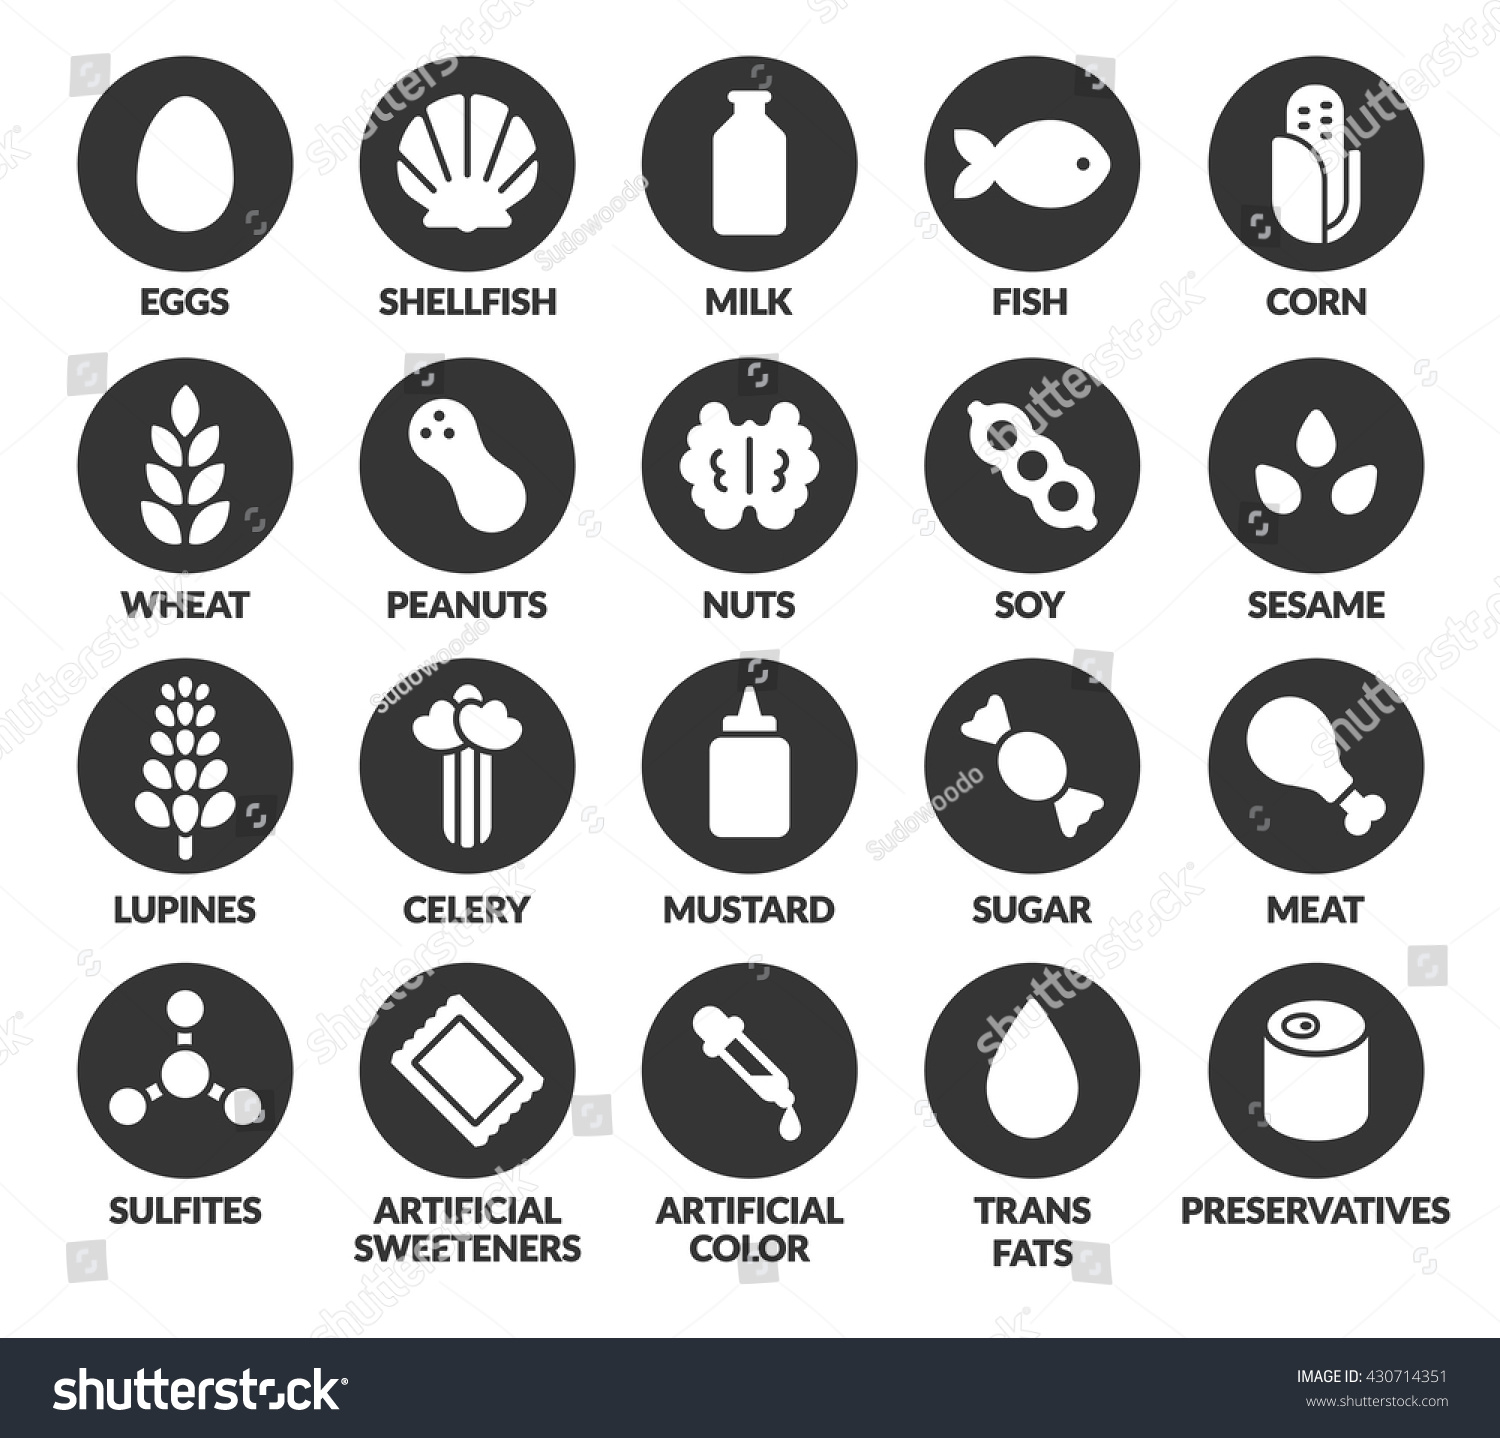 SVG of Set of 20 allergen ingredient icons. Eggs and dairy, nuts and soy, sulfites and preservatives, and other allergy causing foods. svg